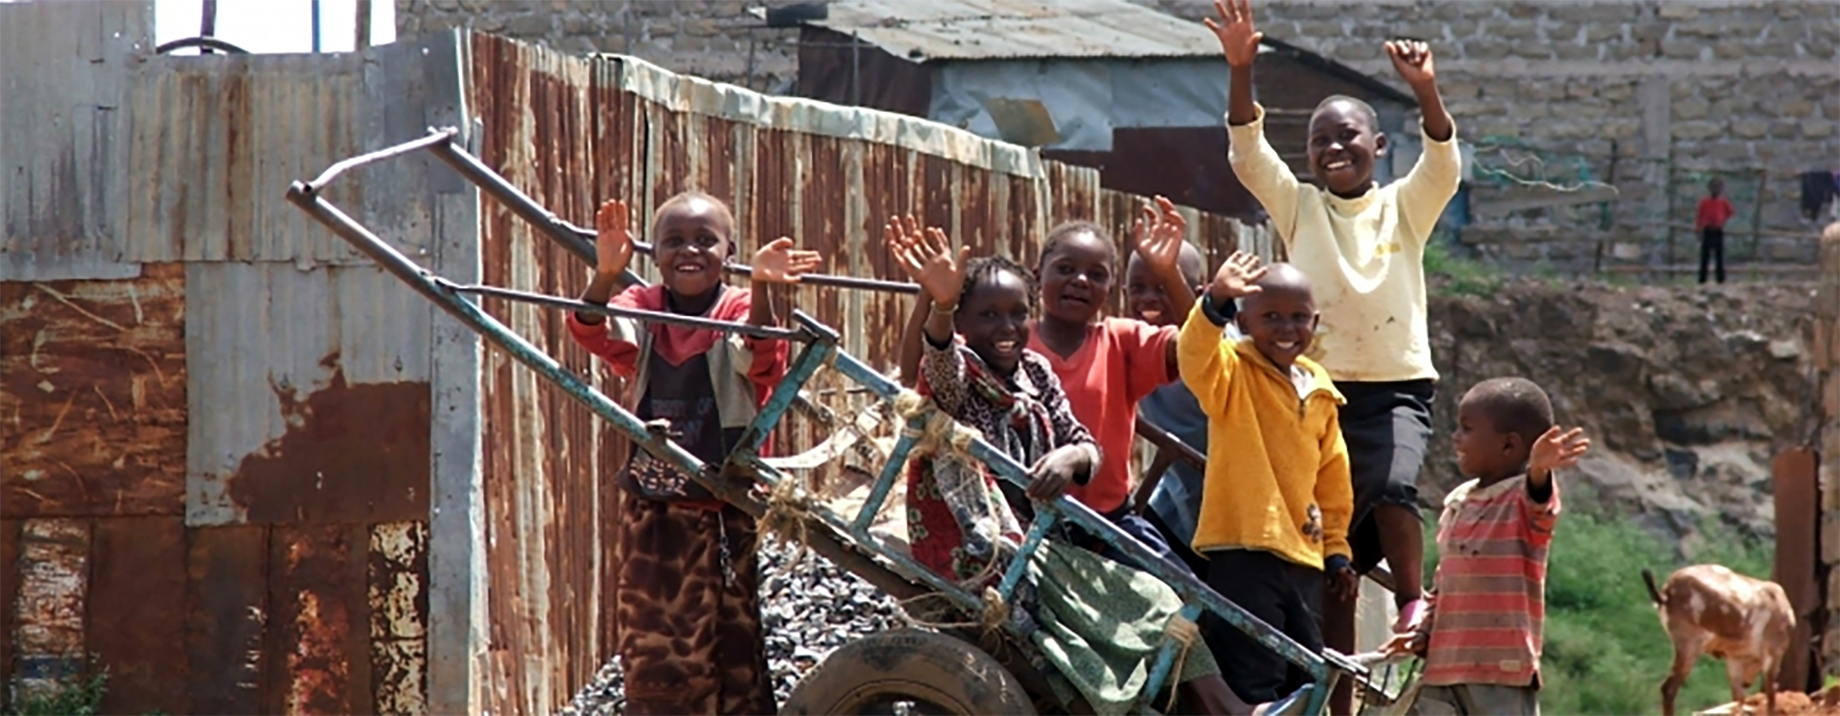 a group of young children, waving